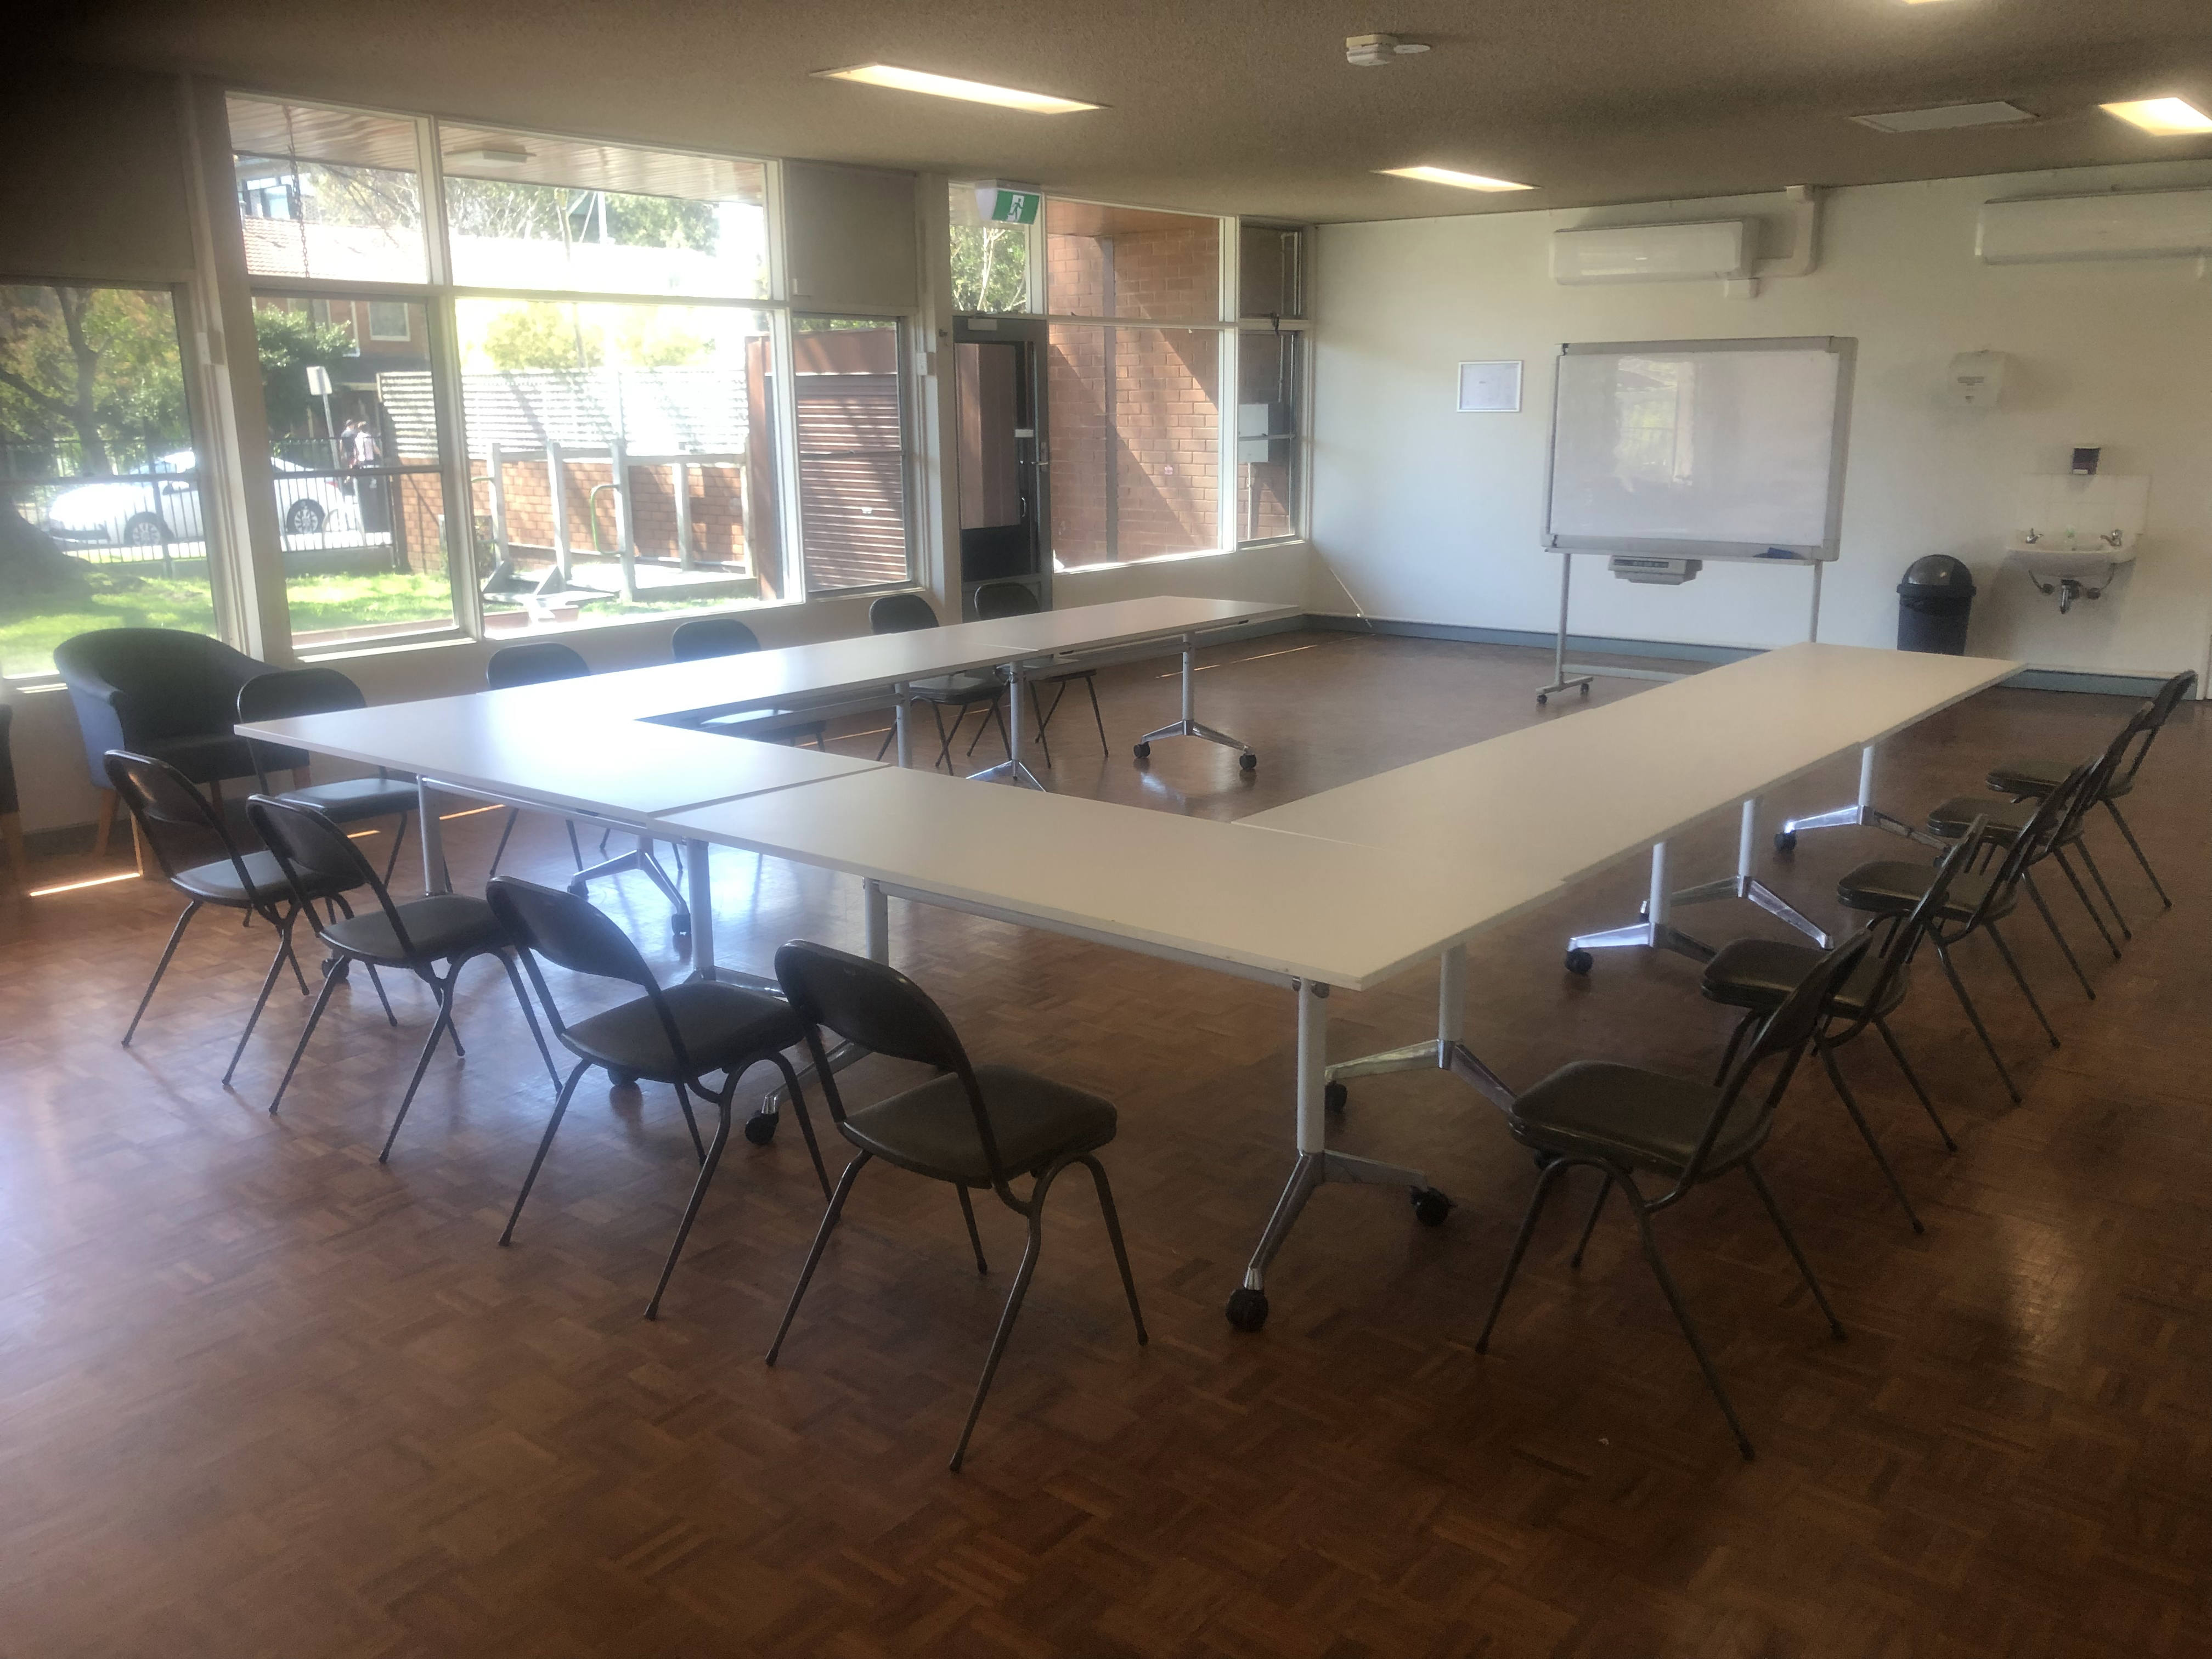 A community hall with white trestle tables setup in a u-shape